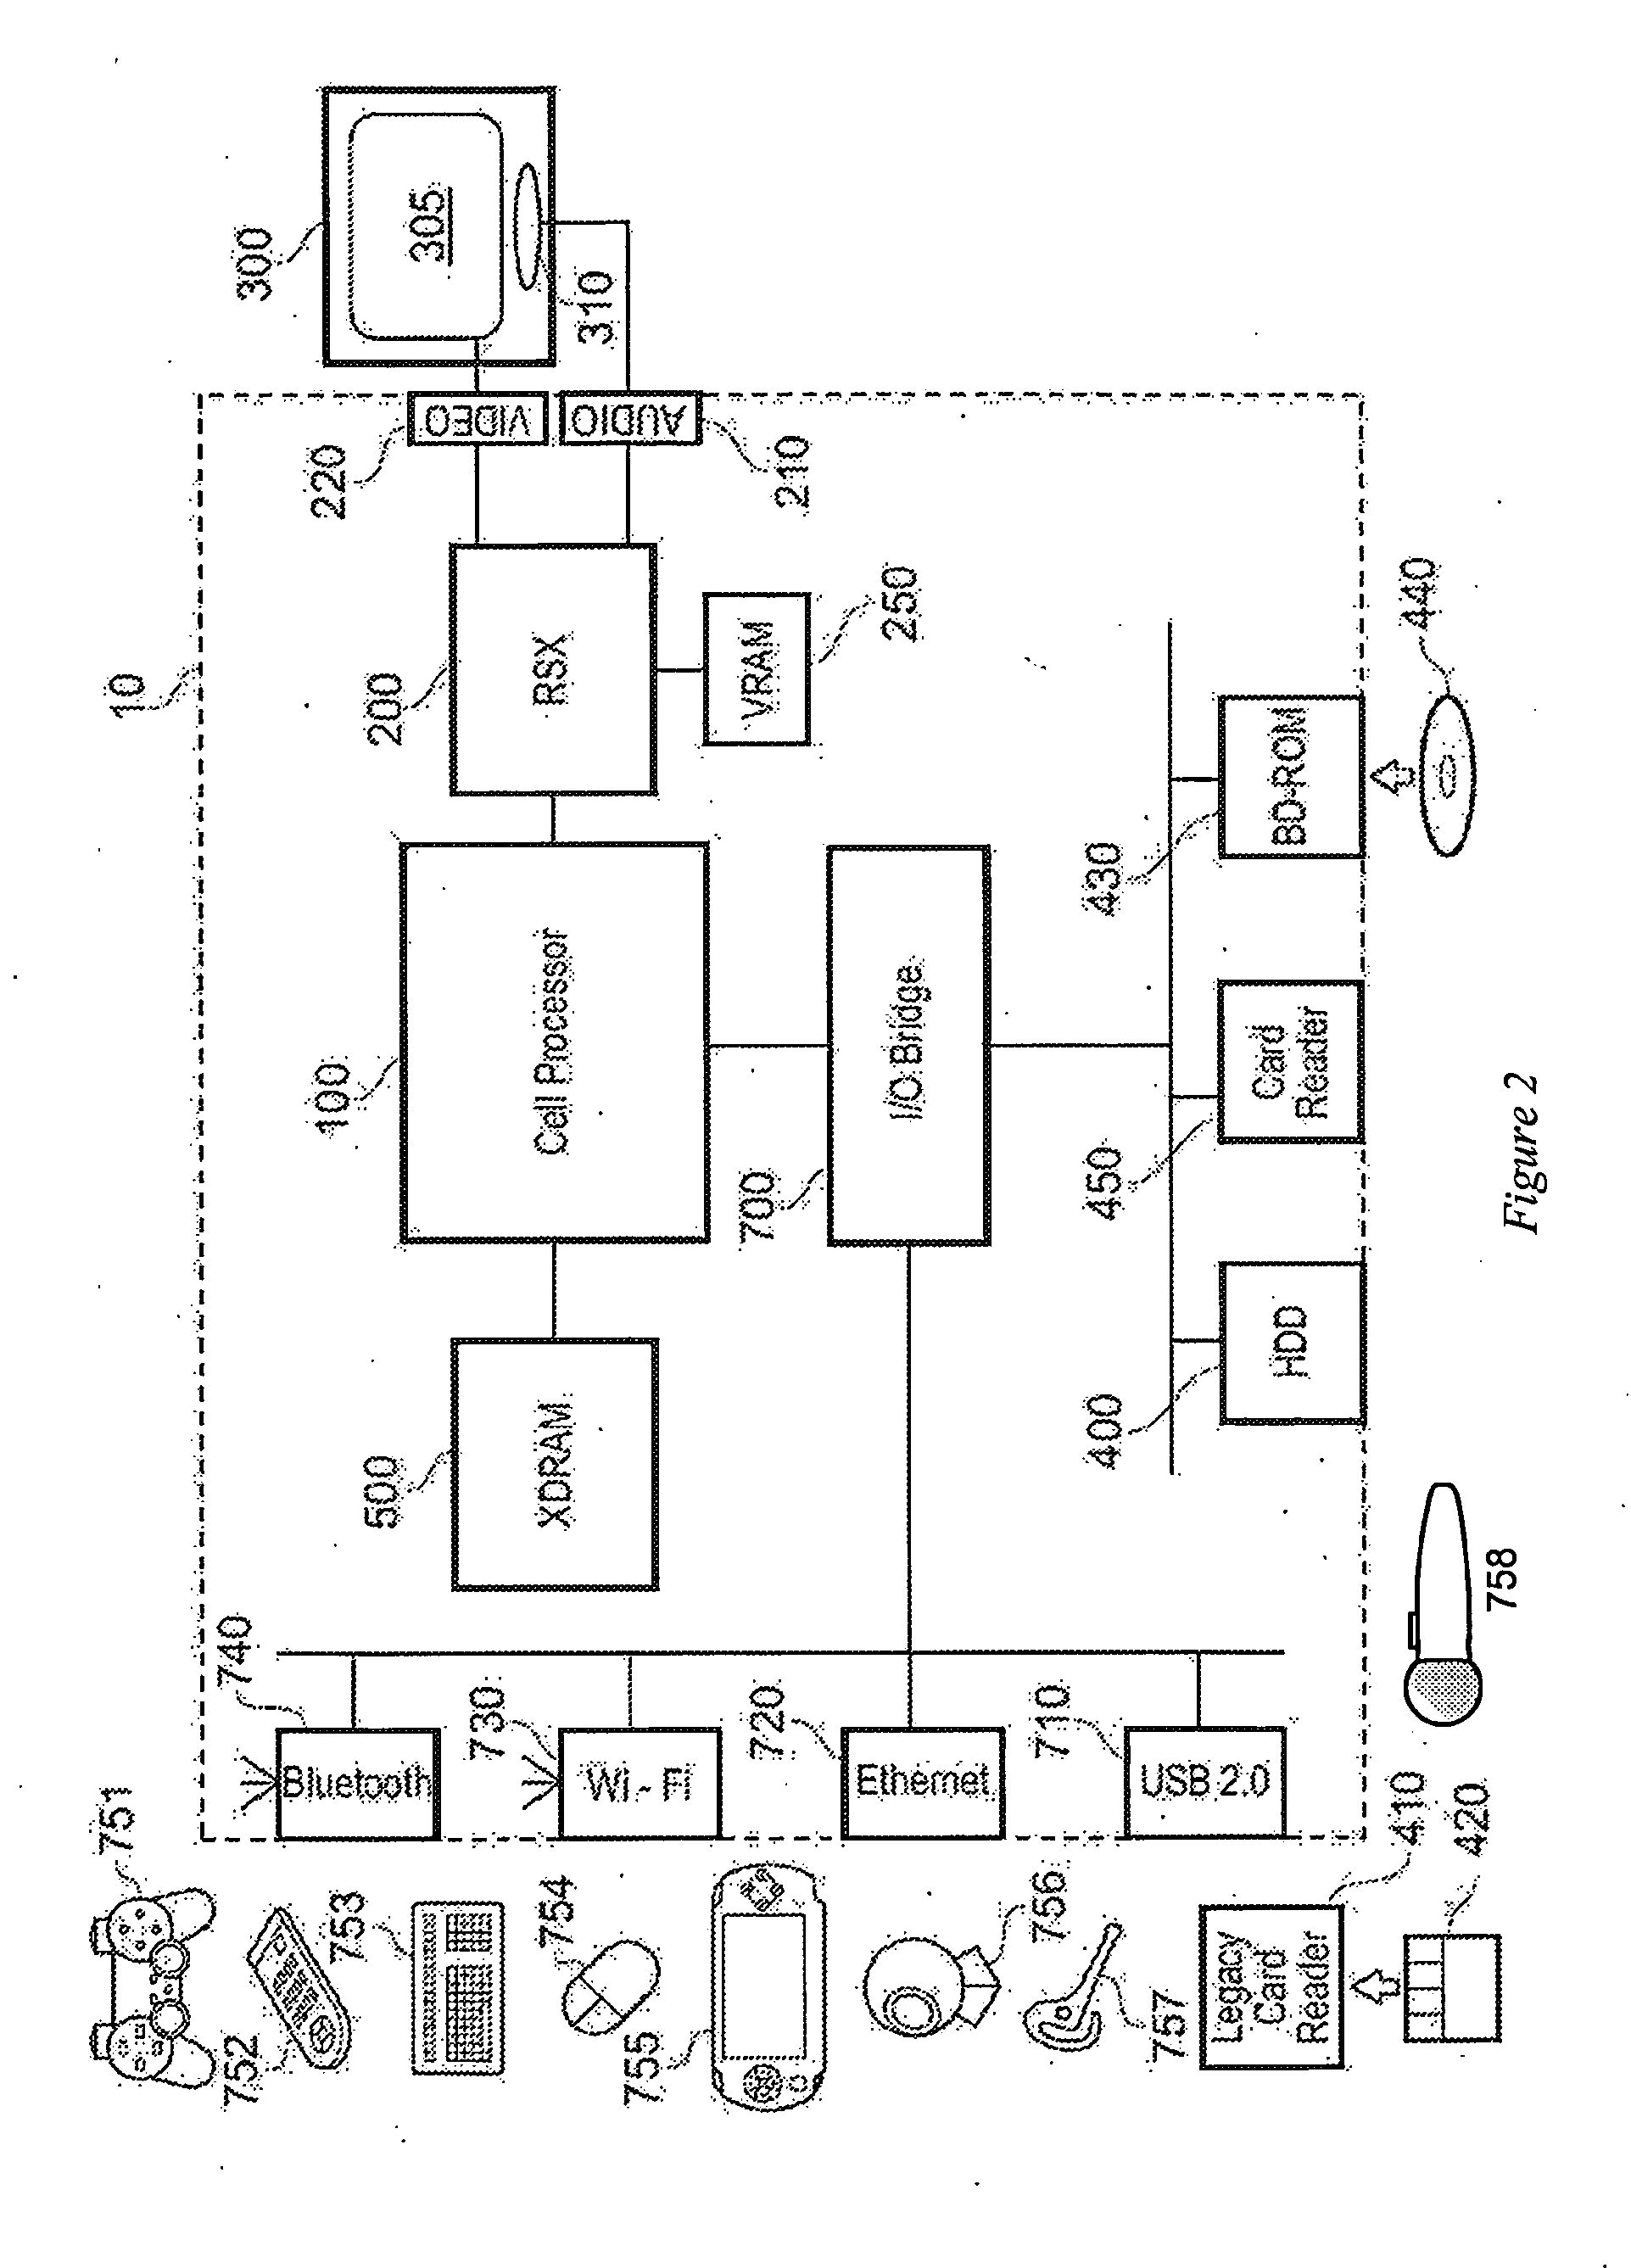 Apparatus and method of augmented reality interaction